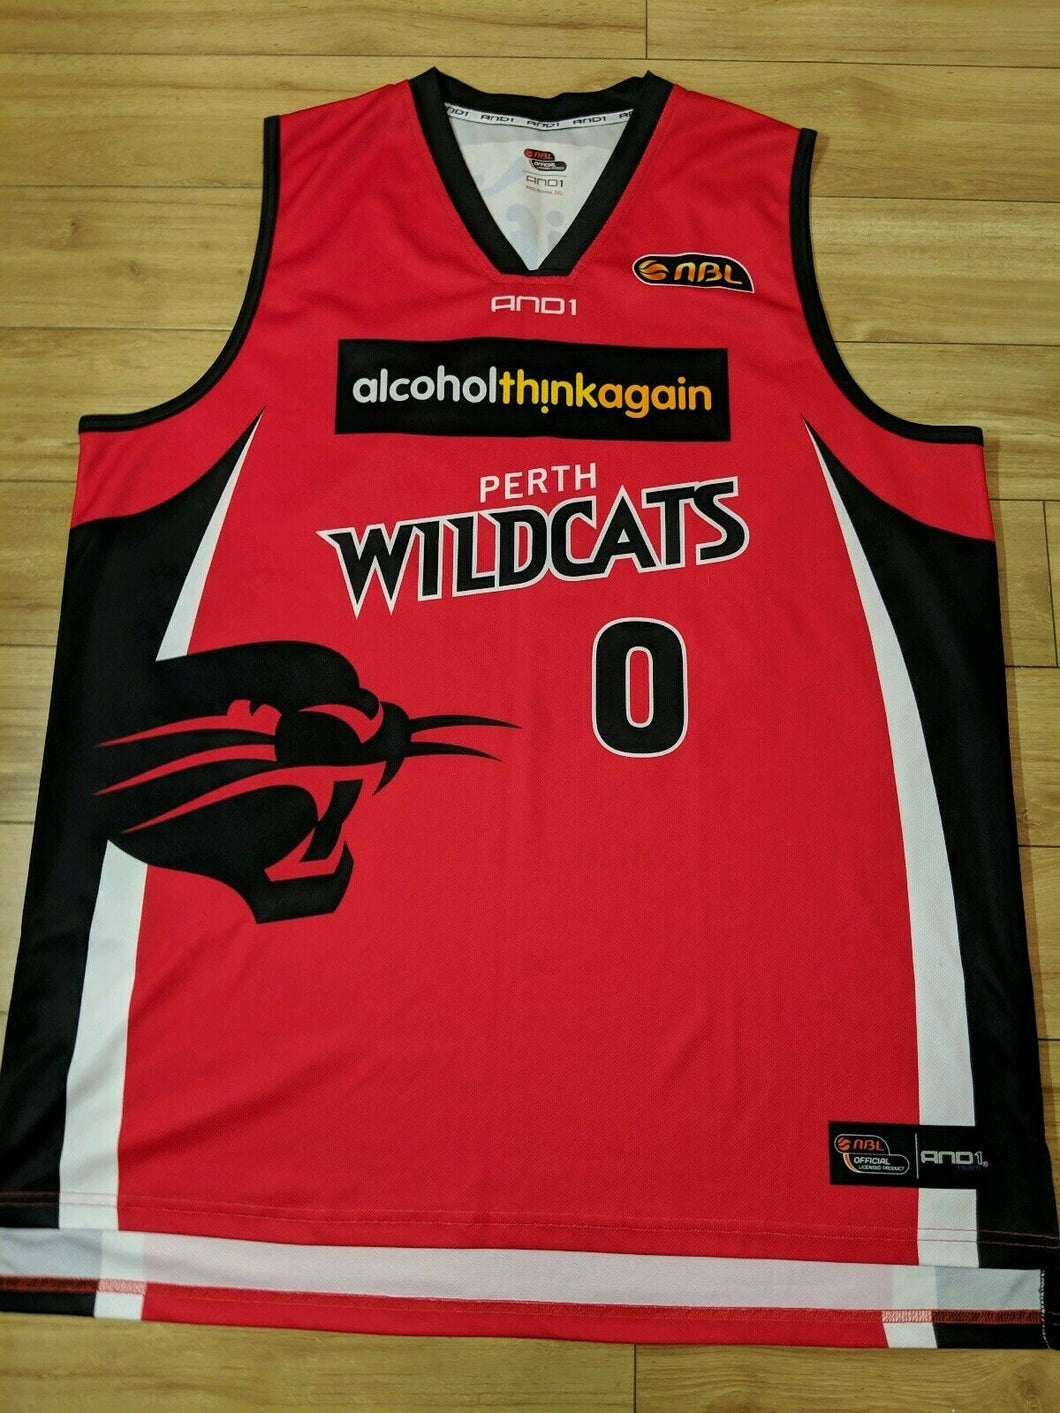 Autographed Pre-Owned Jersey - Jermaine Beal 2015 Perth Wildcats